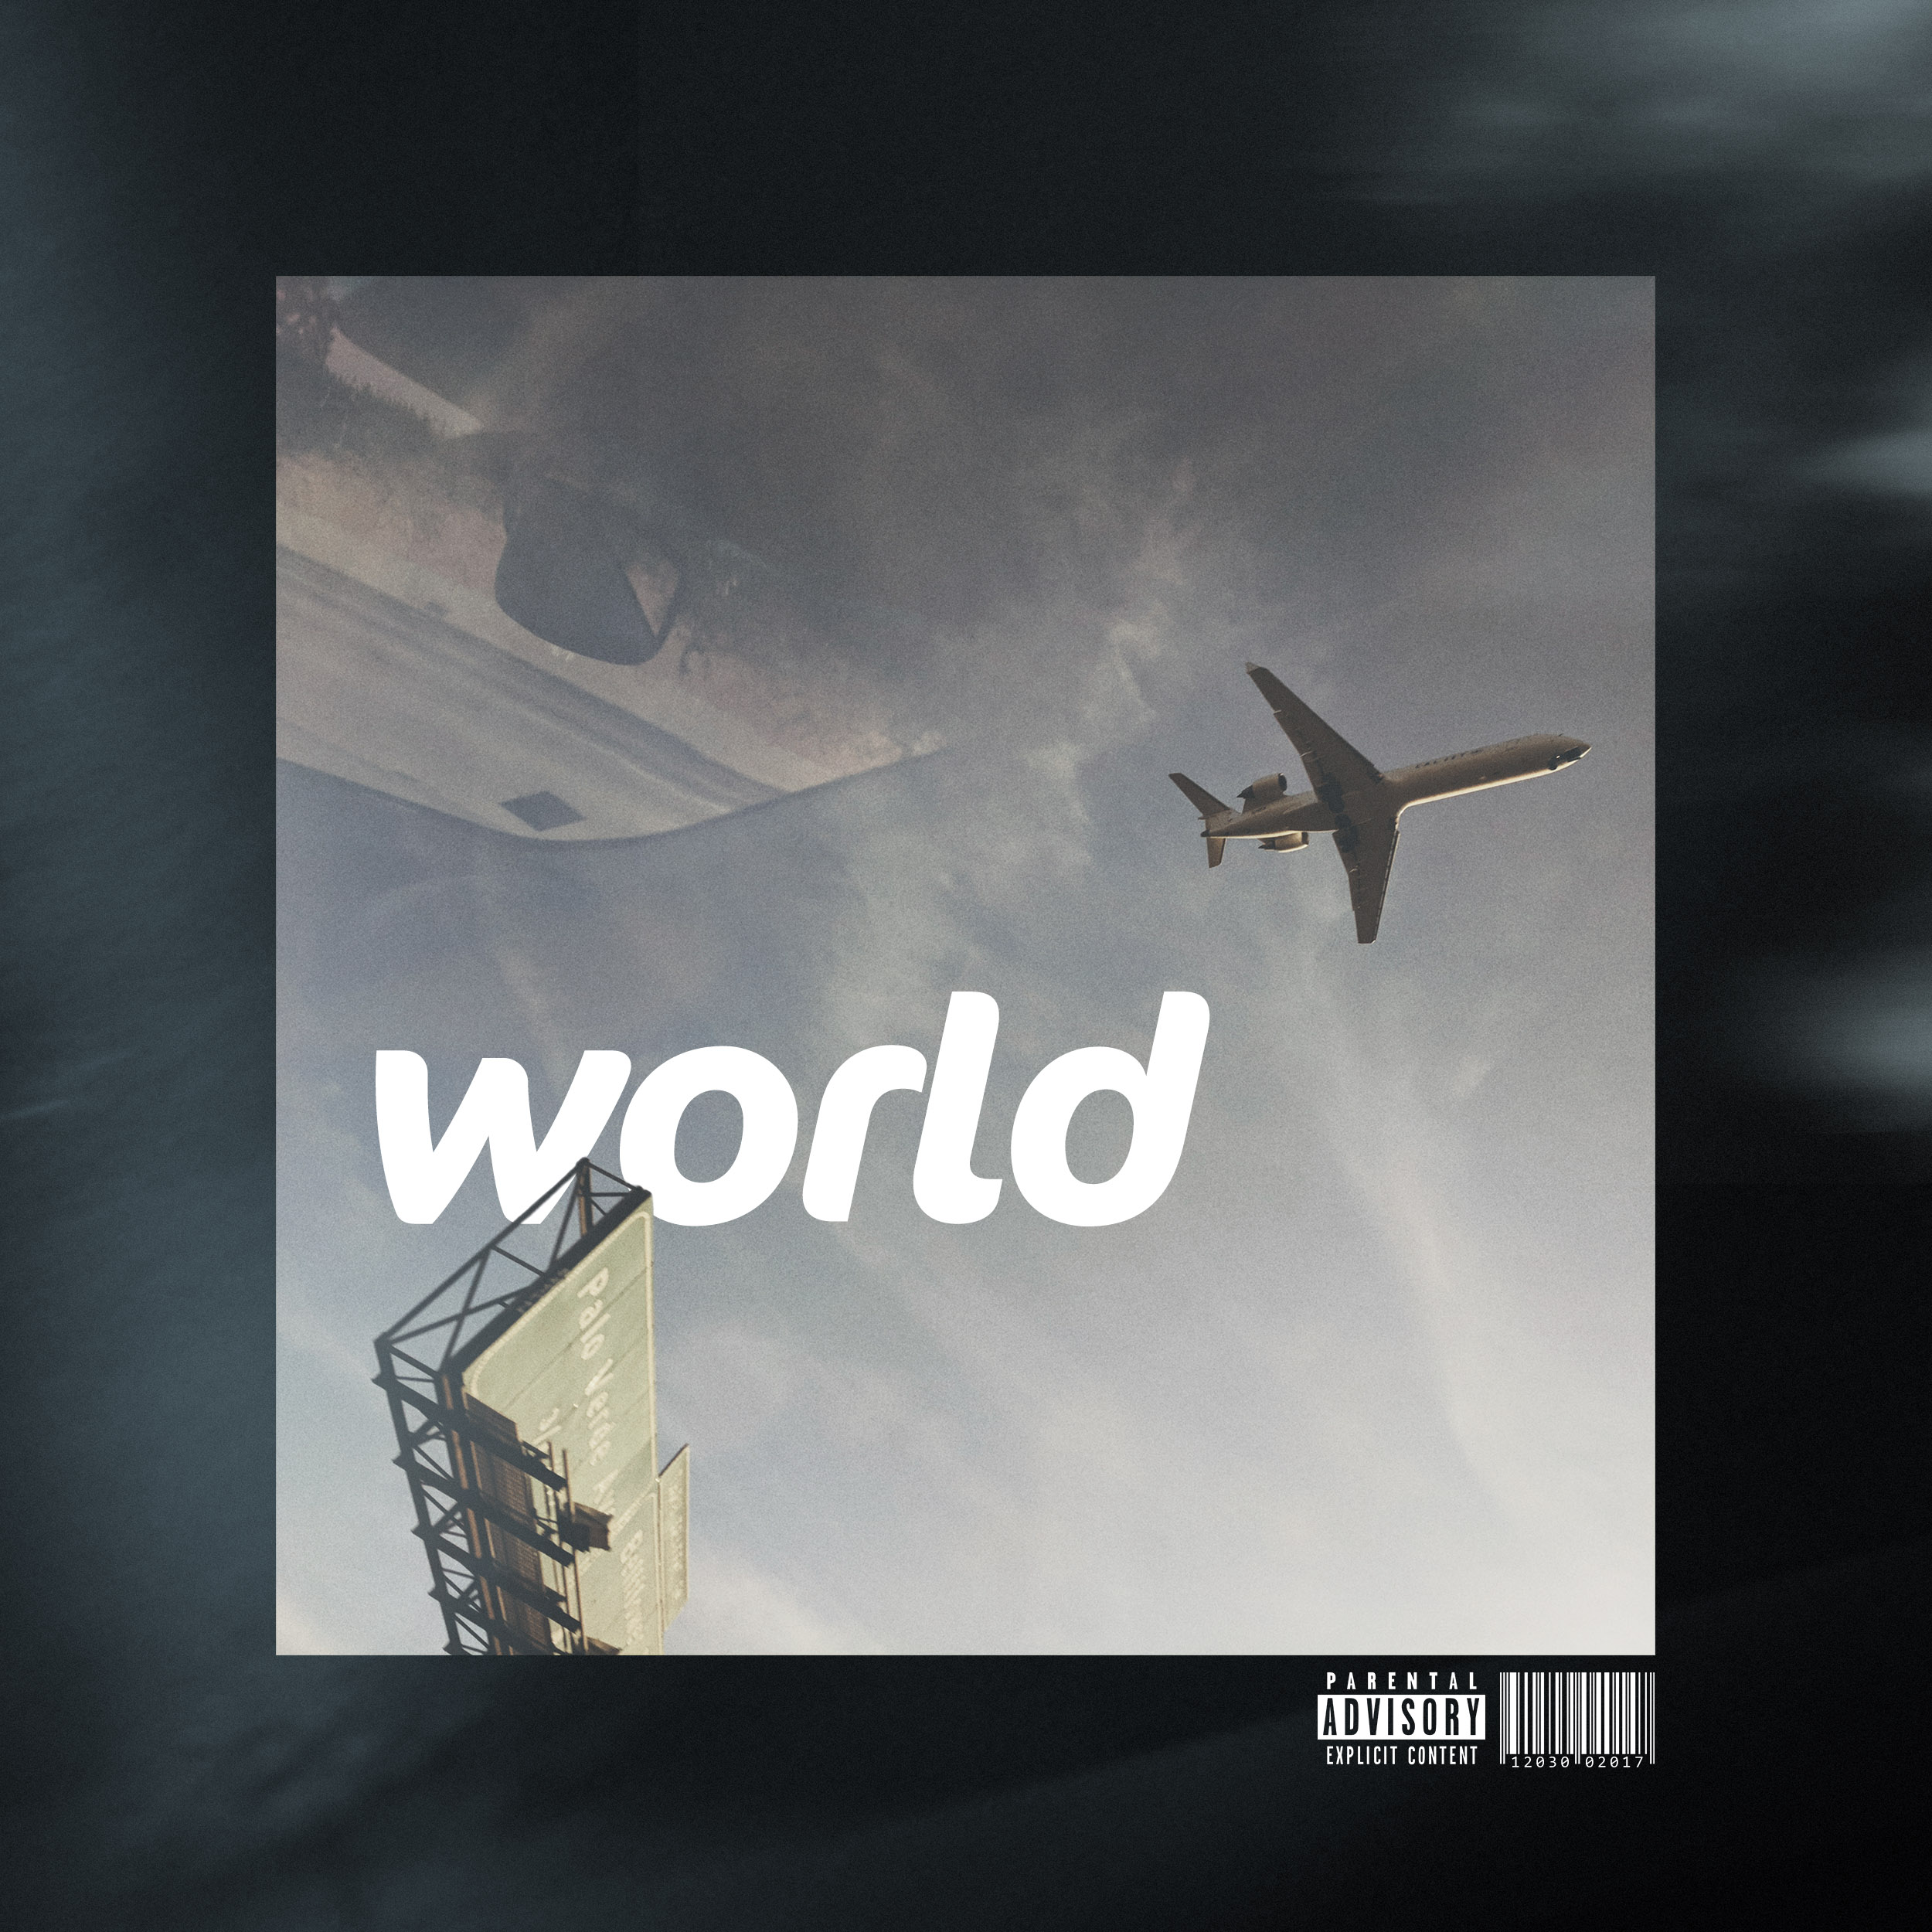 A plane, highway sign, and window reflection in the style of an album cover. Text reads: 'world'.